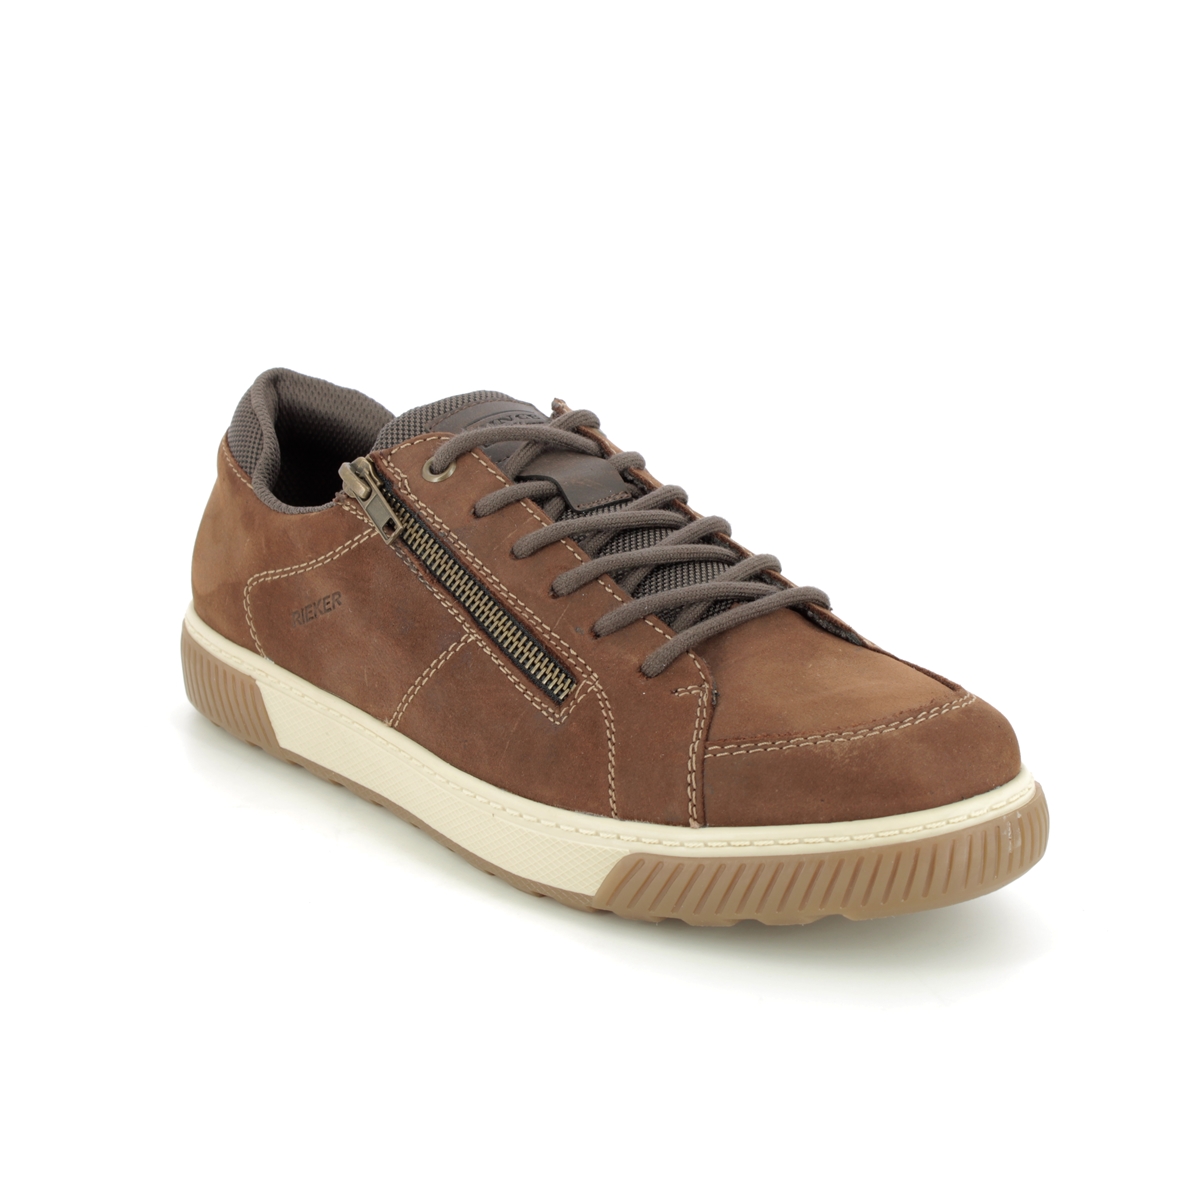 Rieker 18910-22 Tan Suede Mens comfort shoes in a Plain Leather in Size 45